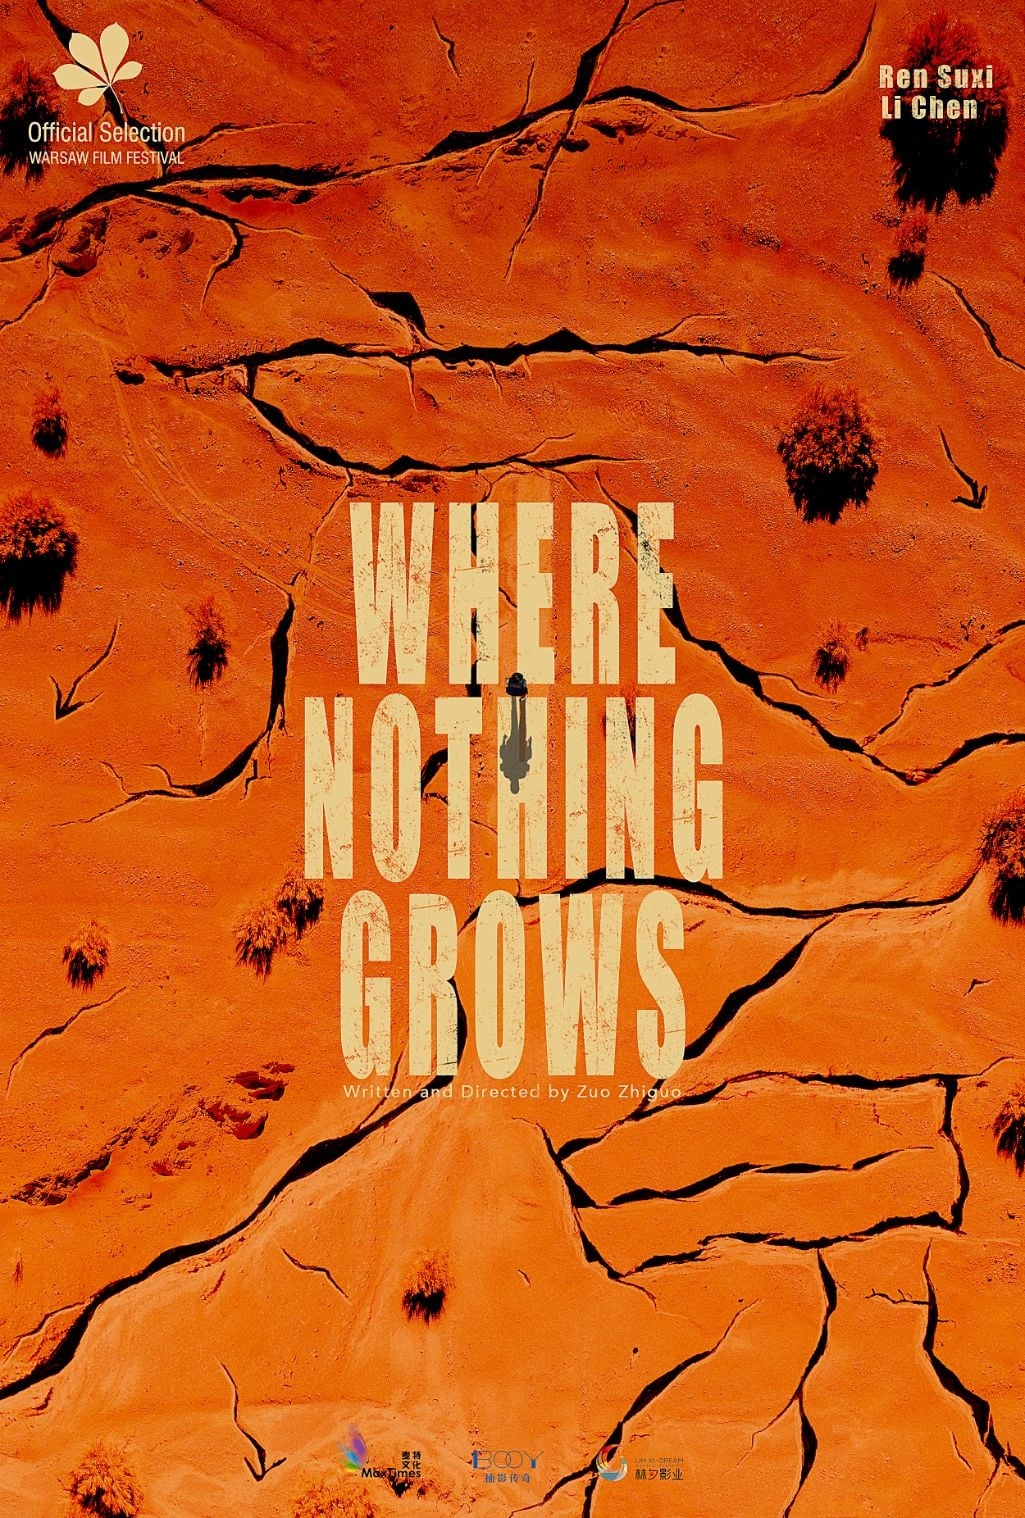 Where Nothing Grows